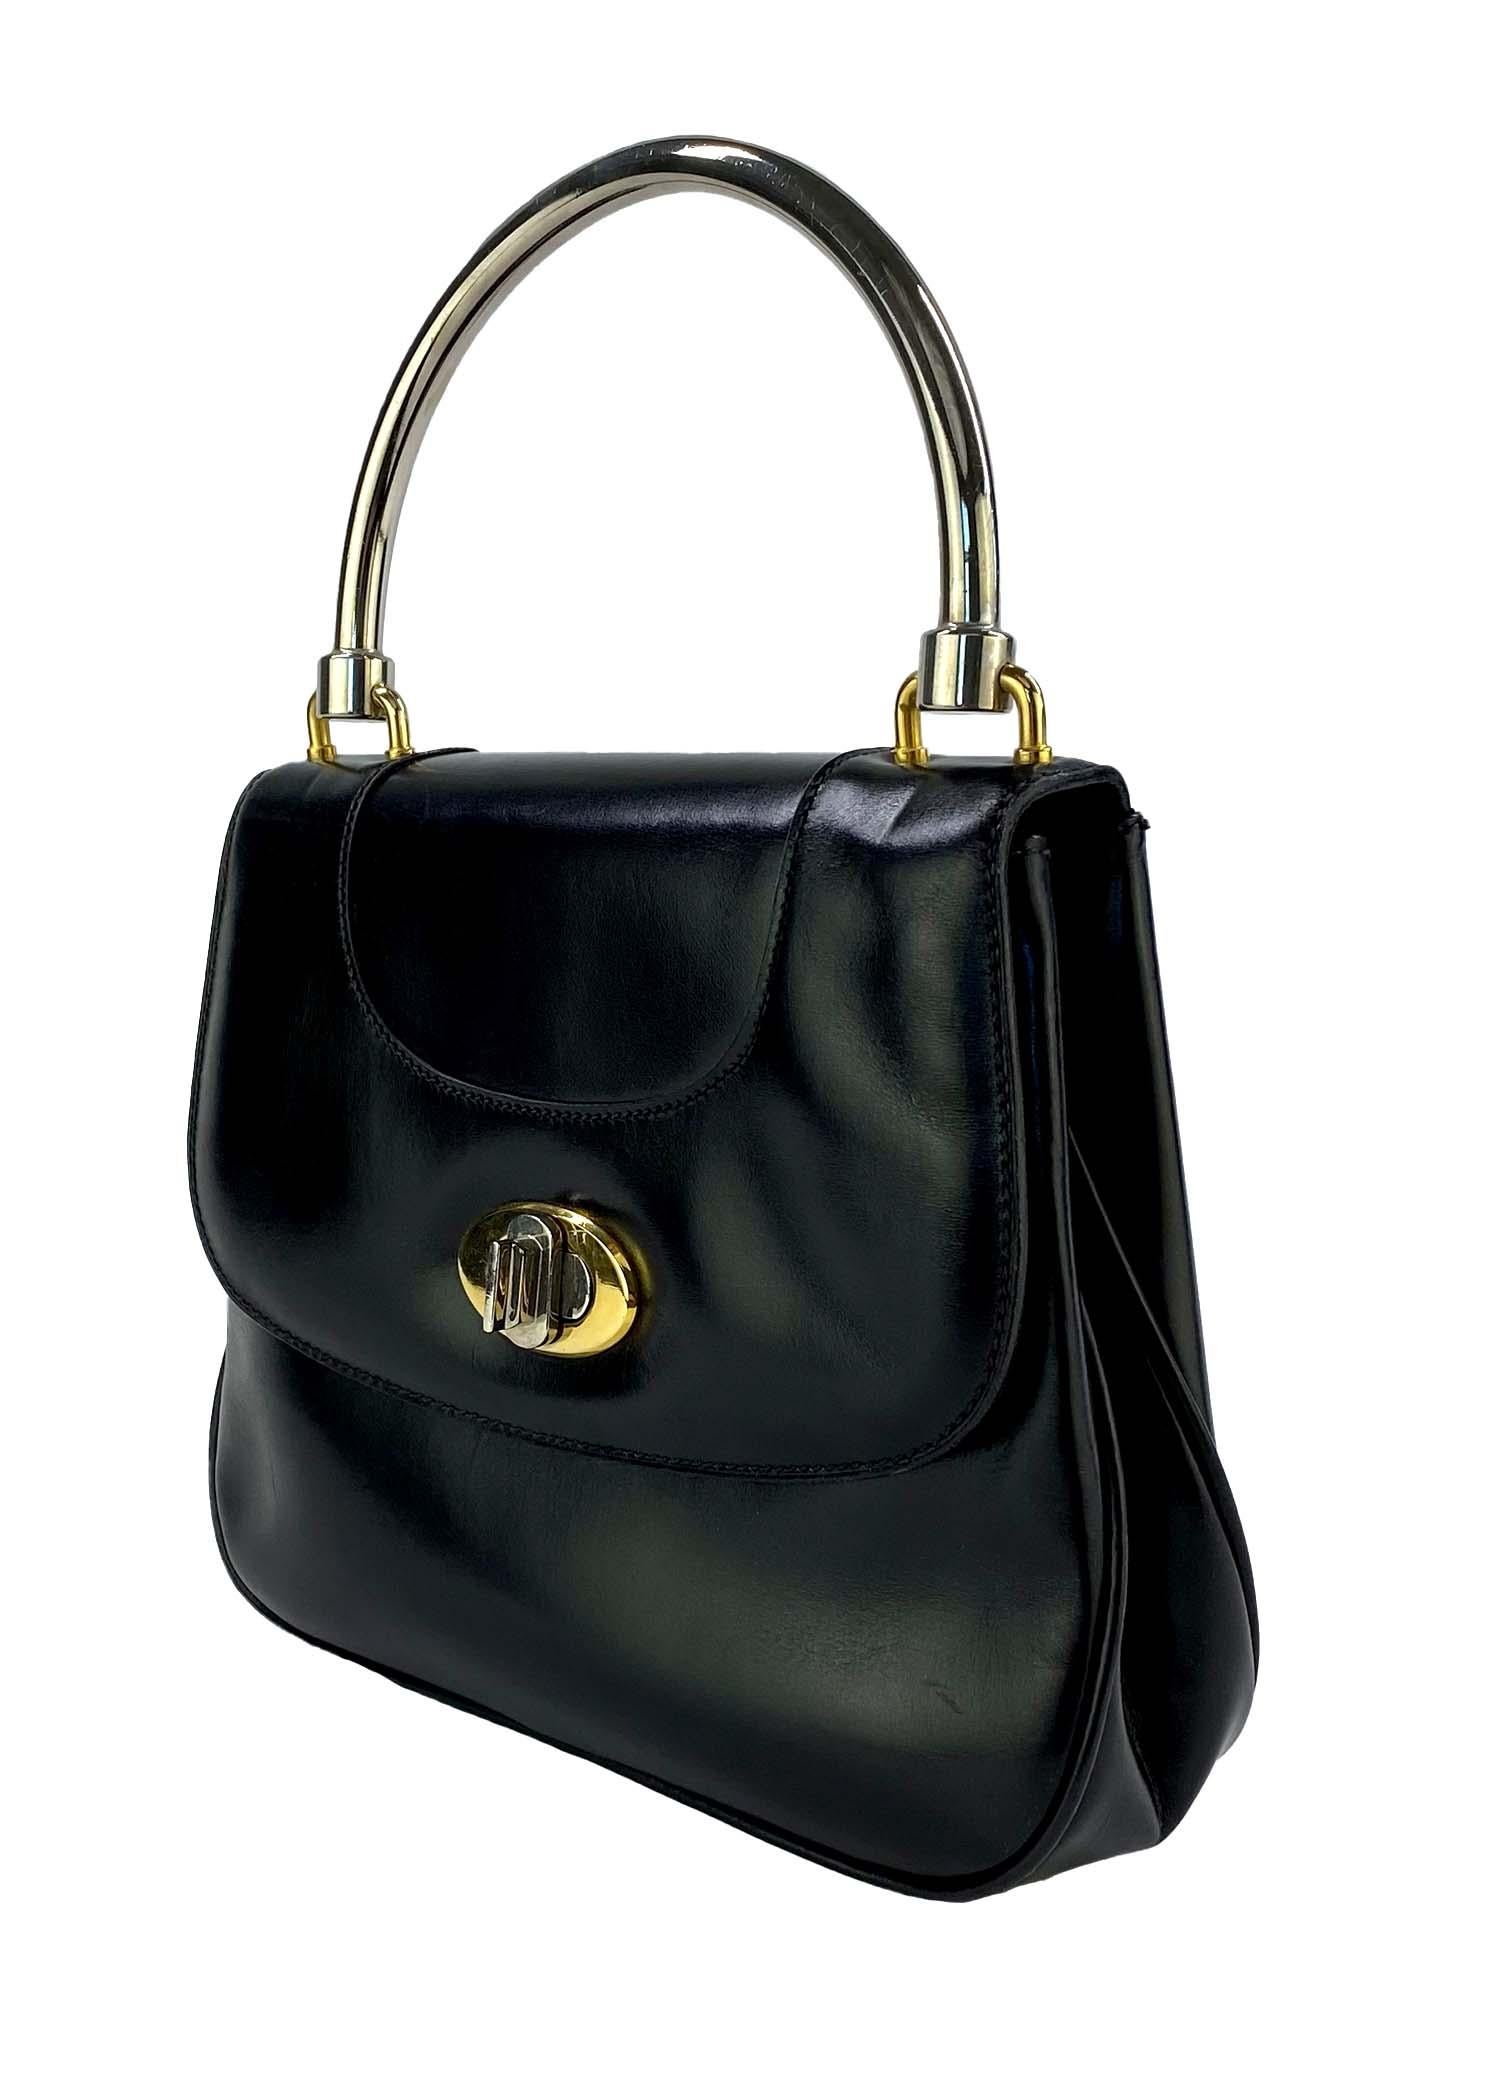 TheRealList presents: a vintage 1960s Gucci structured leather top handle bag. This classicly designed bag features a dual-tone metal handle and closure. The dark black leather has a semigloss finish to perfectly match the shine of the hardware.